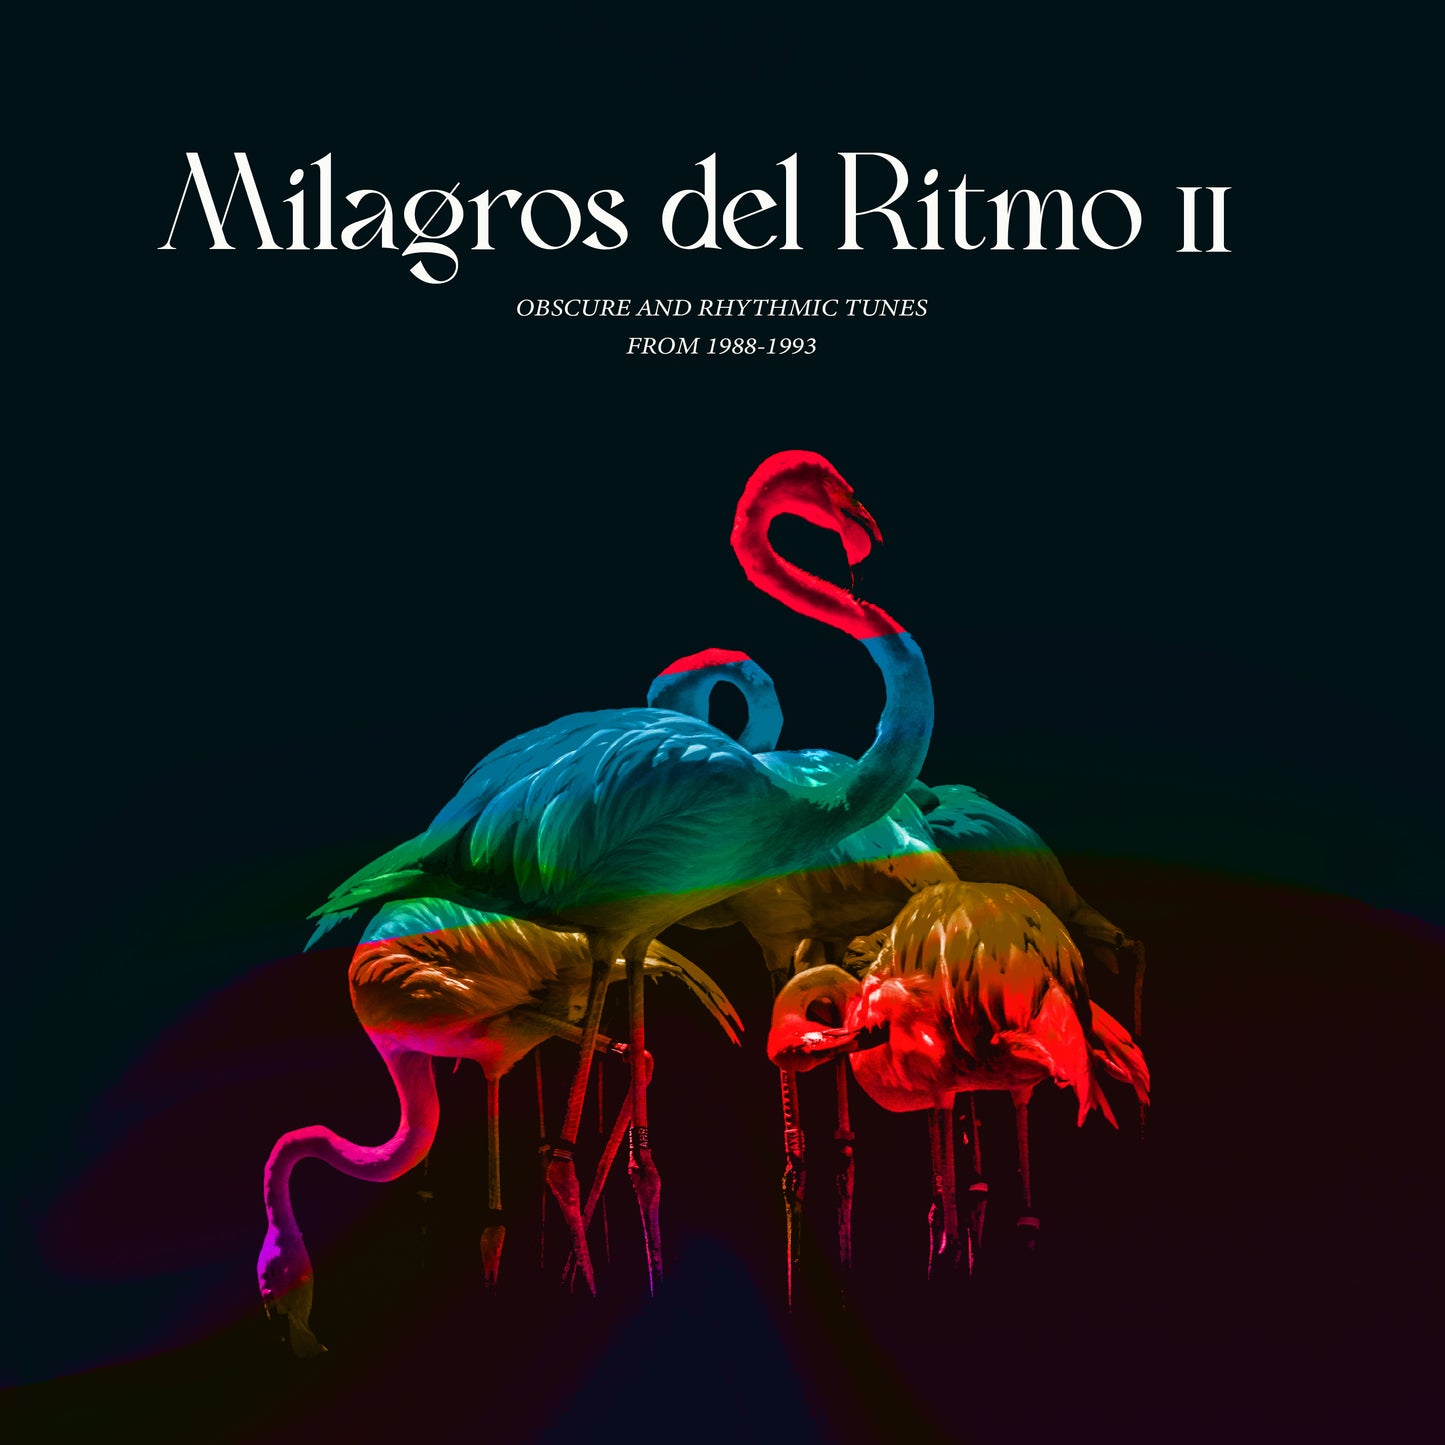 Jose Manuel presents: Milagros Del Ritmo II "Obscure And Rhythmic Tunes from 1988-1993"